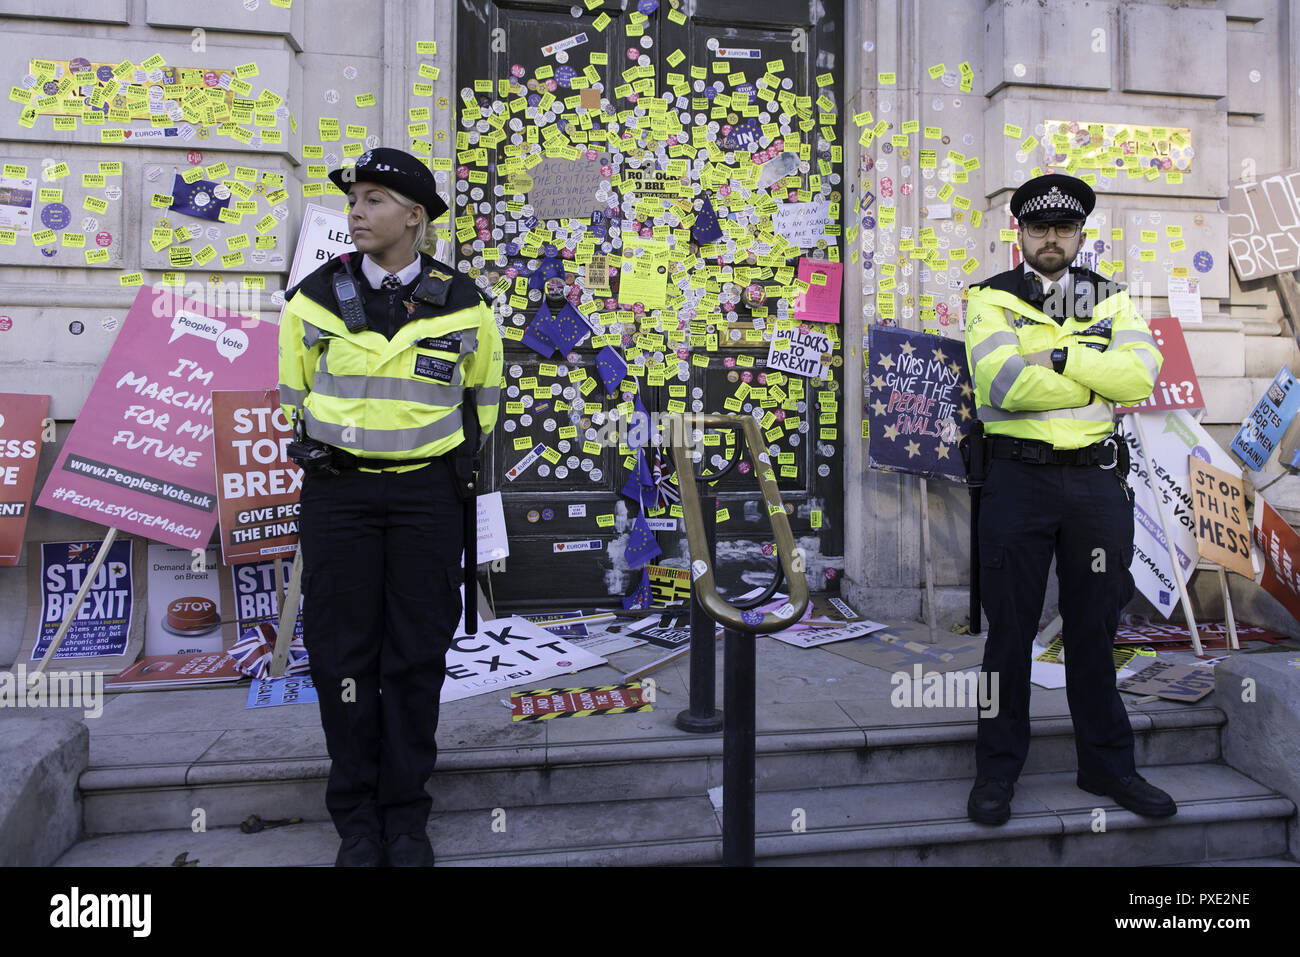 London, Greater London, UK. 20th Oct, 2018. Police officers are seen standing on guard in the Cabinet office building entrance to prevent anti-Brexit protesters from continuing sticking stickers around the entrance during the march.A huge demonstration organised by the People's vote campaign gathered at Park Lane to march to the Parliament Square to protest against the Tory government's Brexit negotiations and demanding for a second vote on the final Brexit deal. Credit: Andres Pantoja/SOPA Images/ZUMA Wire/Alamy Live News Stock Photo